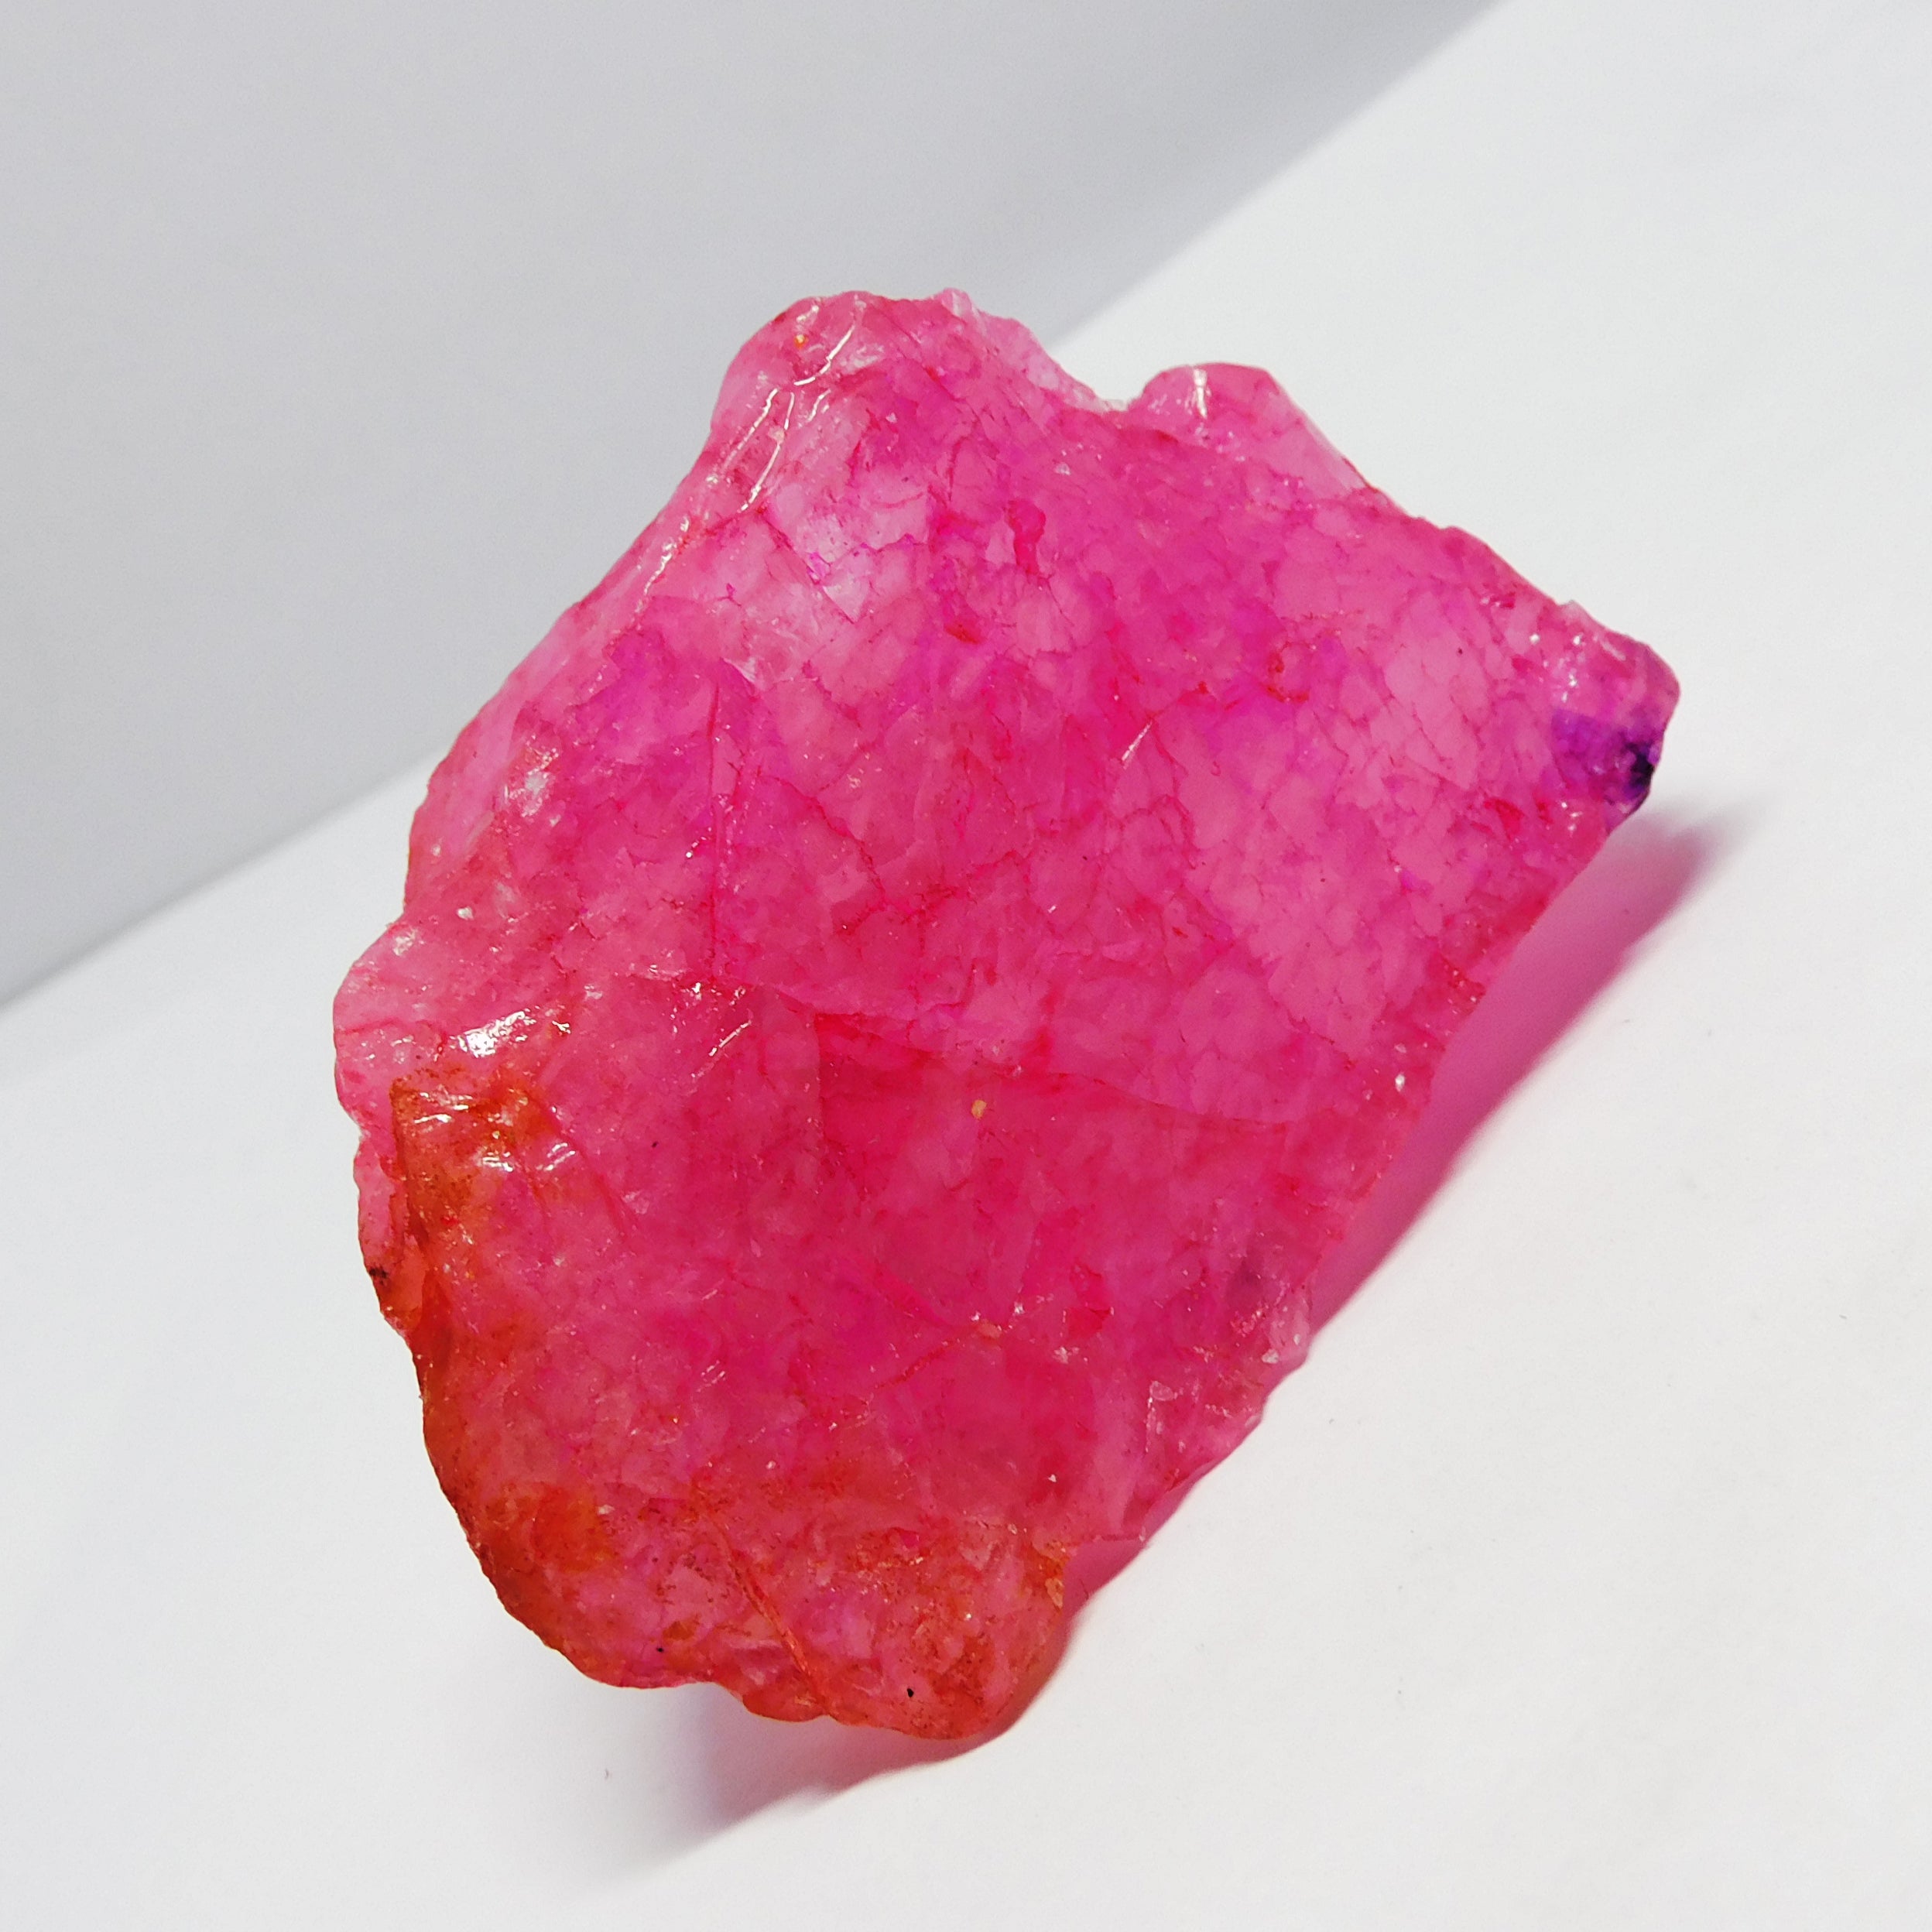 Best Offer !!! Certified Raw Rough 475.10 Carat Uncut Pink Ruby Rough Natural Loose Gemstone , Huge Size Rough , Pink Rough, July Pink Rough